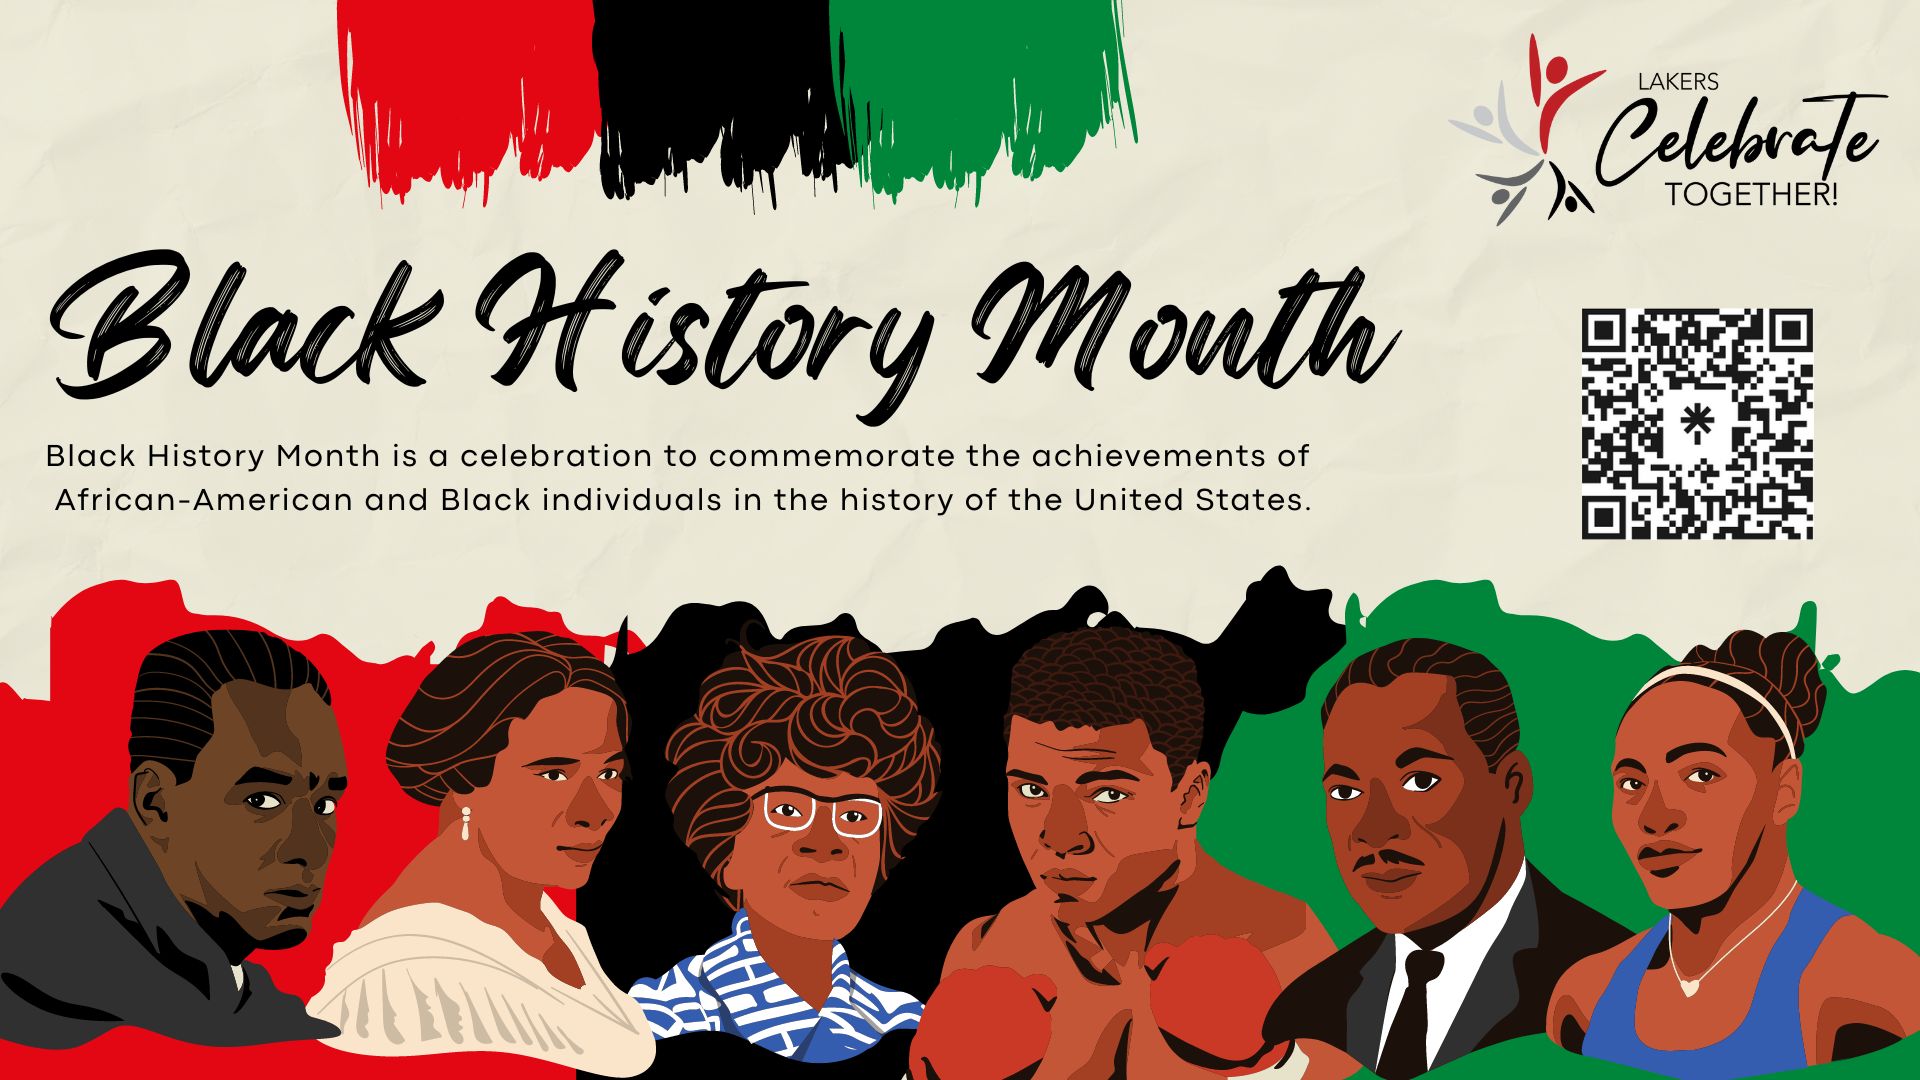 Several animations of Black historical figures on a beige background with red, black and green color splashes in teh background